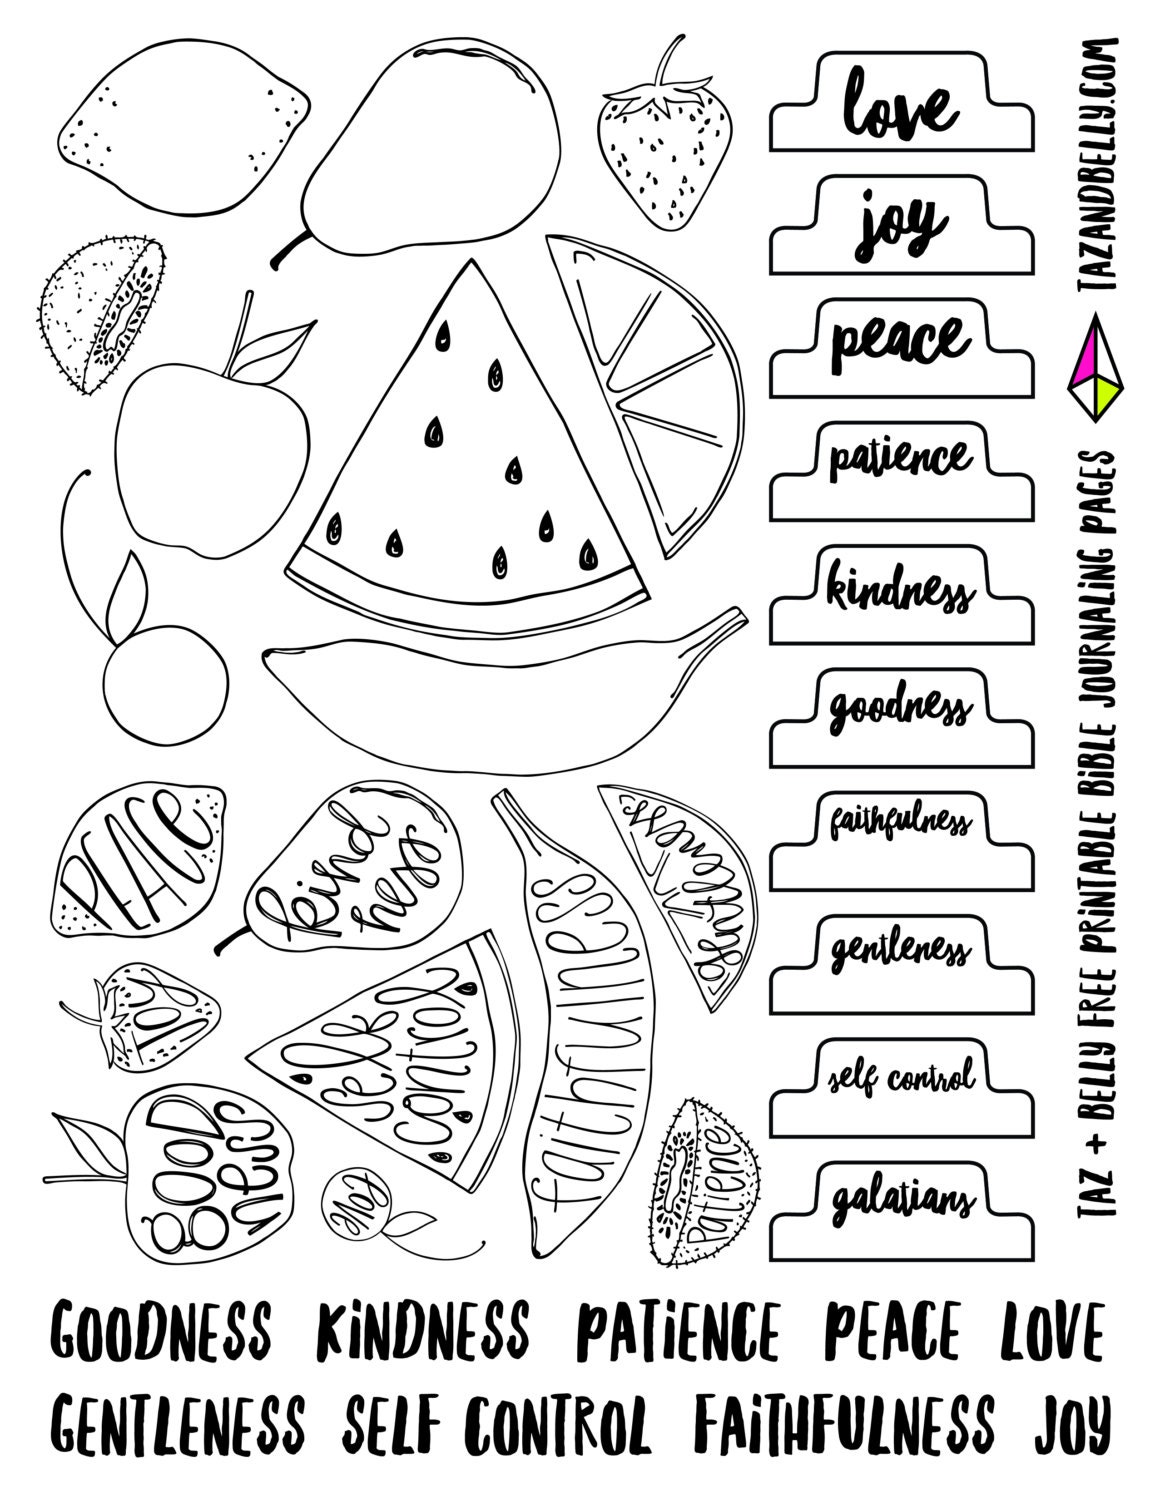 get-printable-coloring-sheet-fruits-of-the-spirit-coloring-page-pics